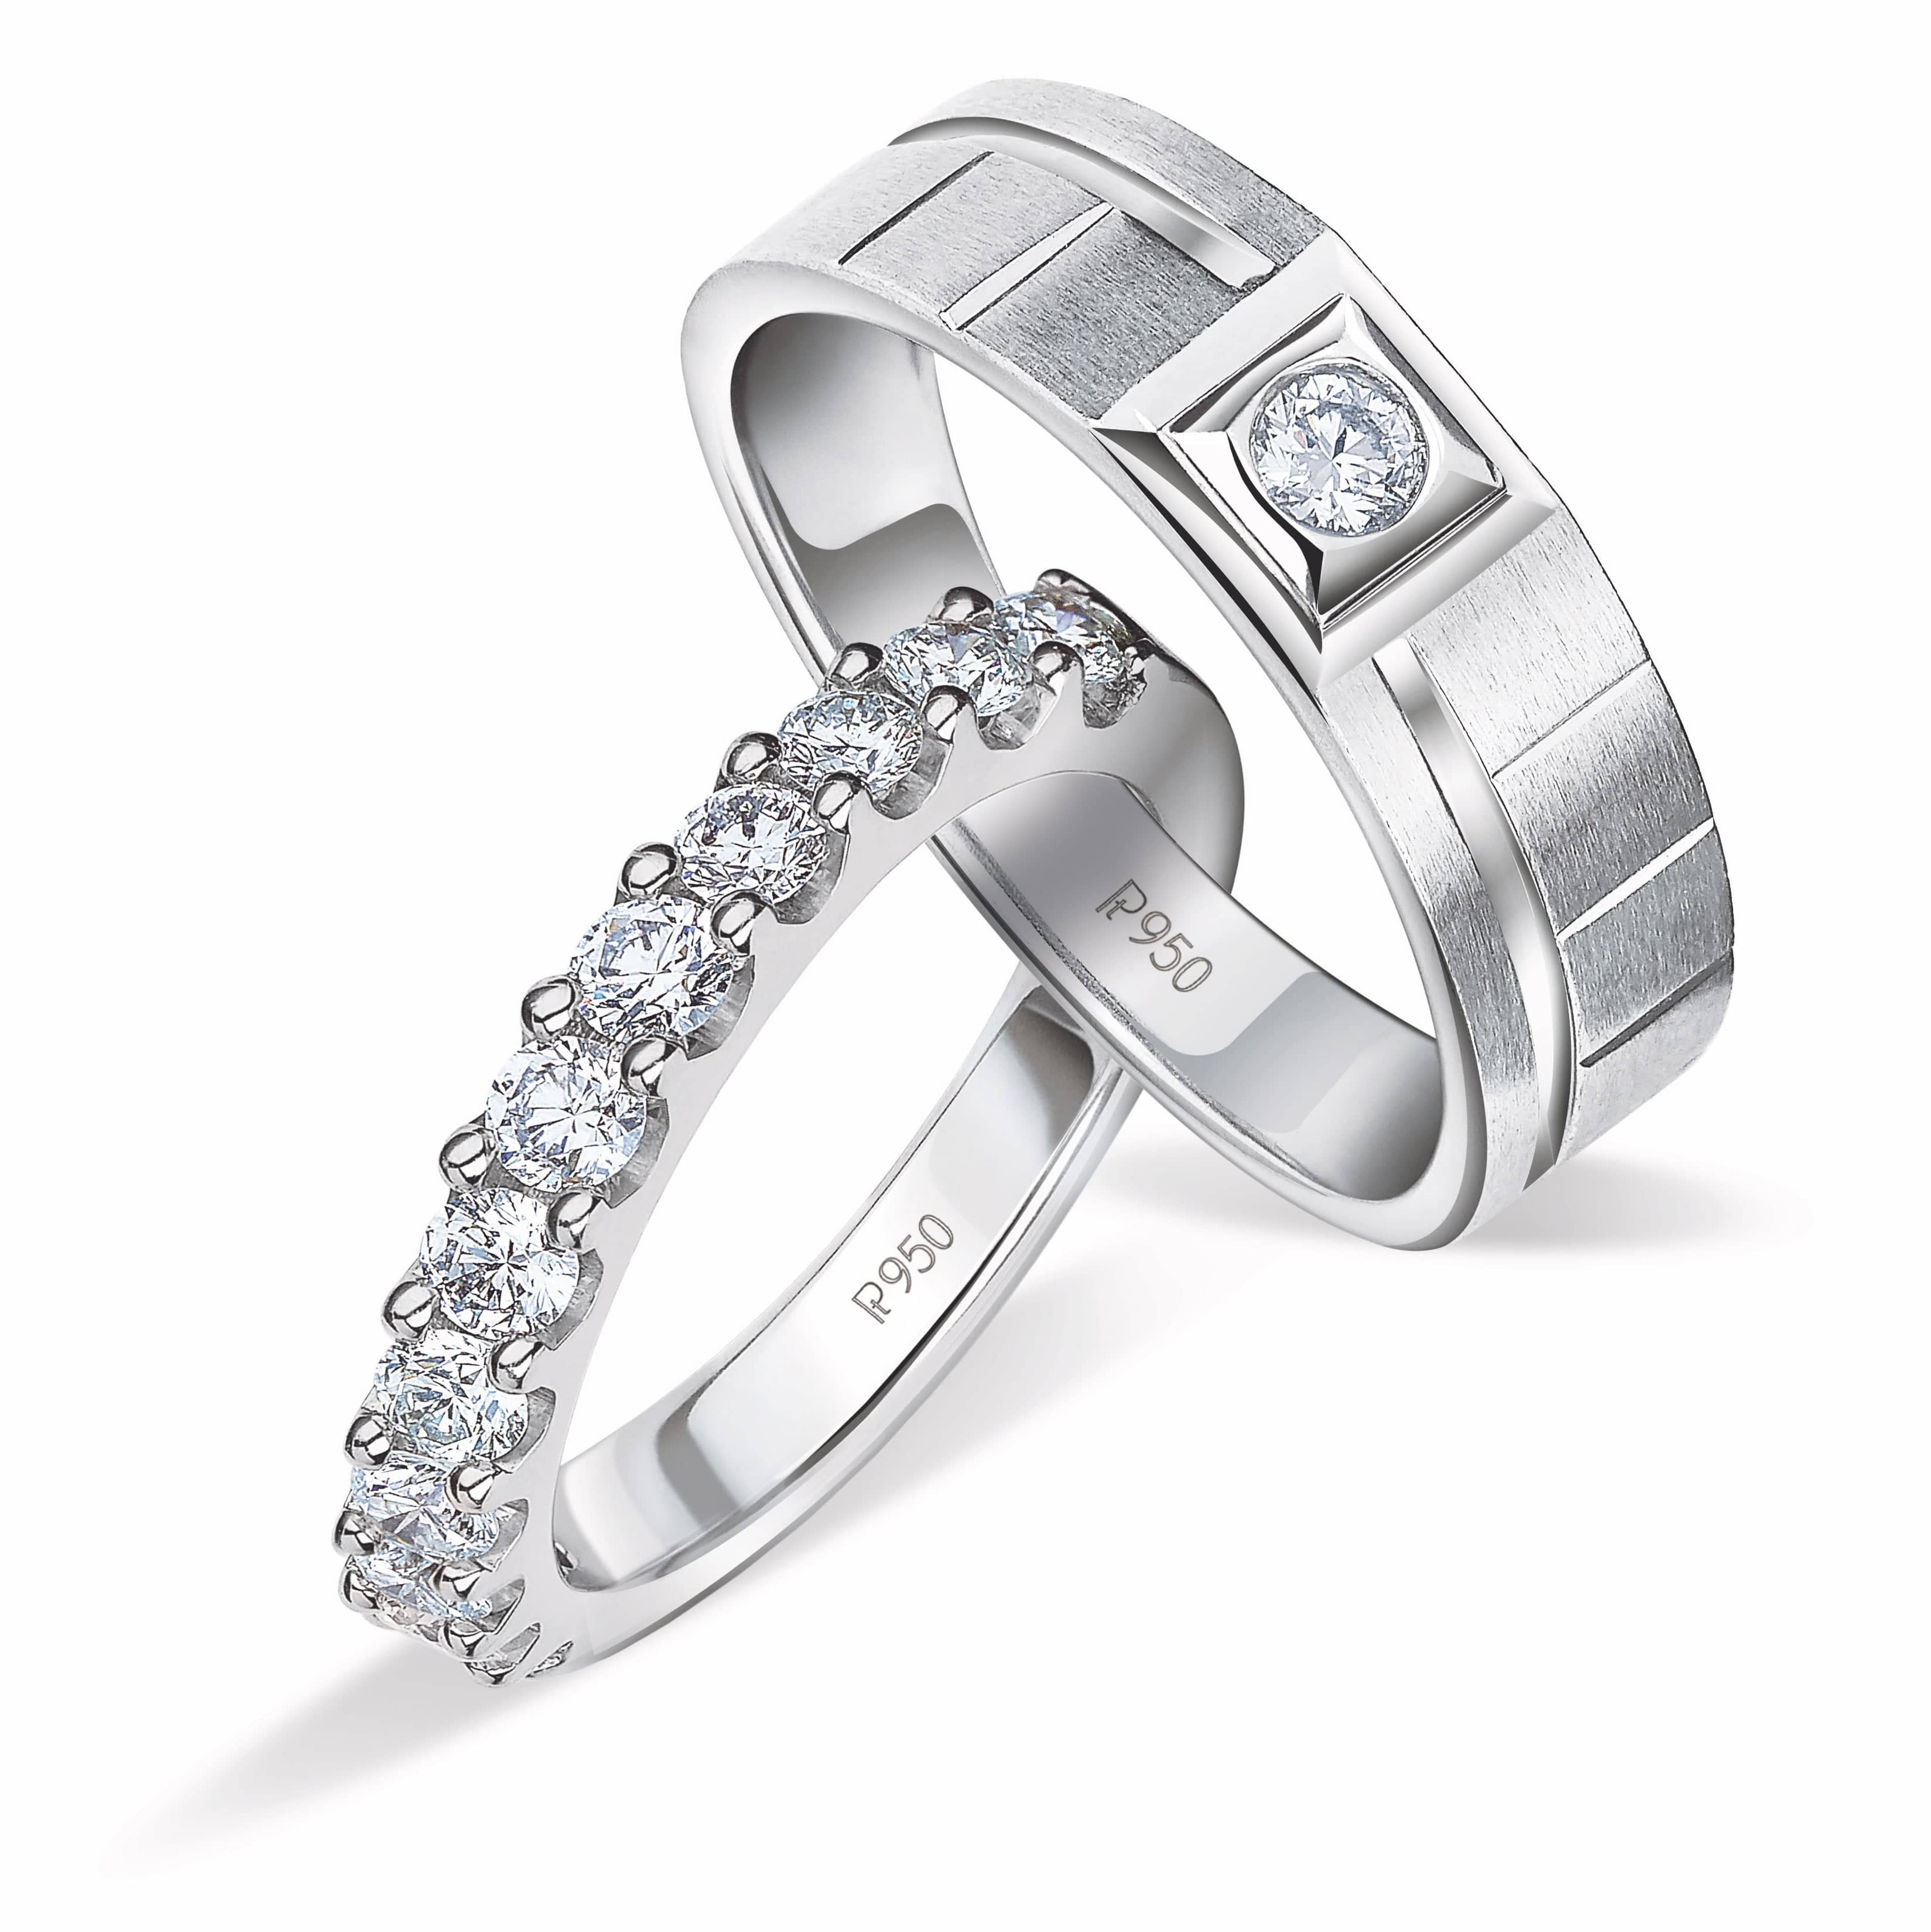 Which Hand for Engagement Rings Wedding & Eternity Rings?